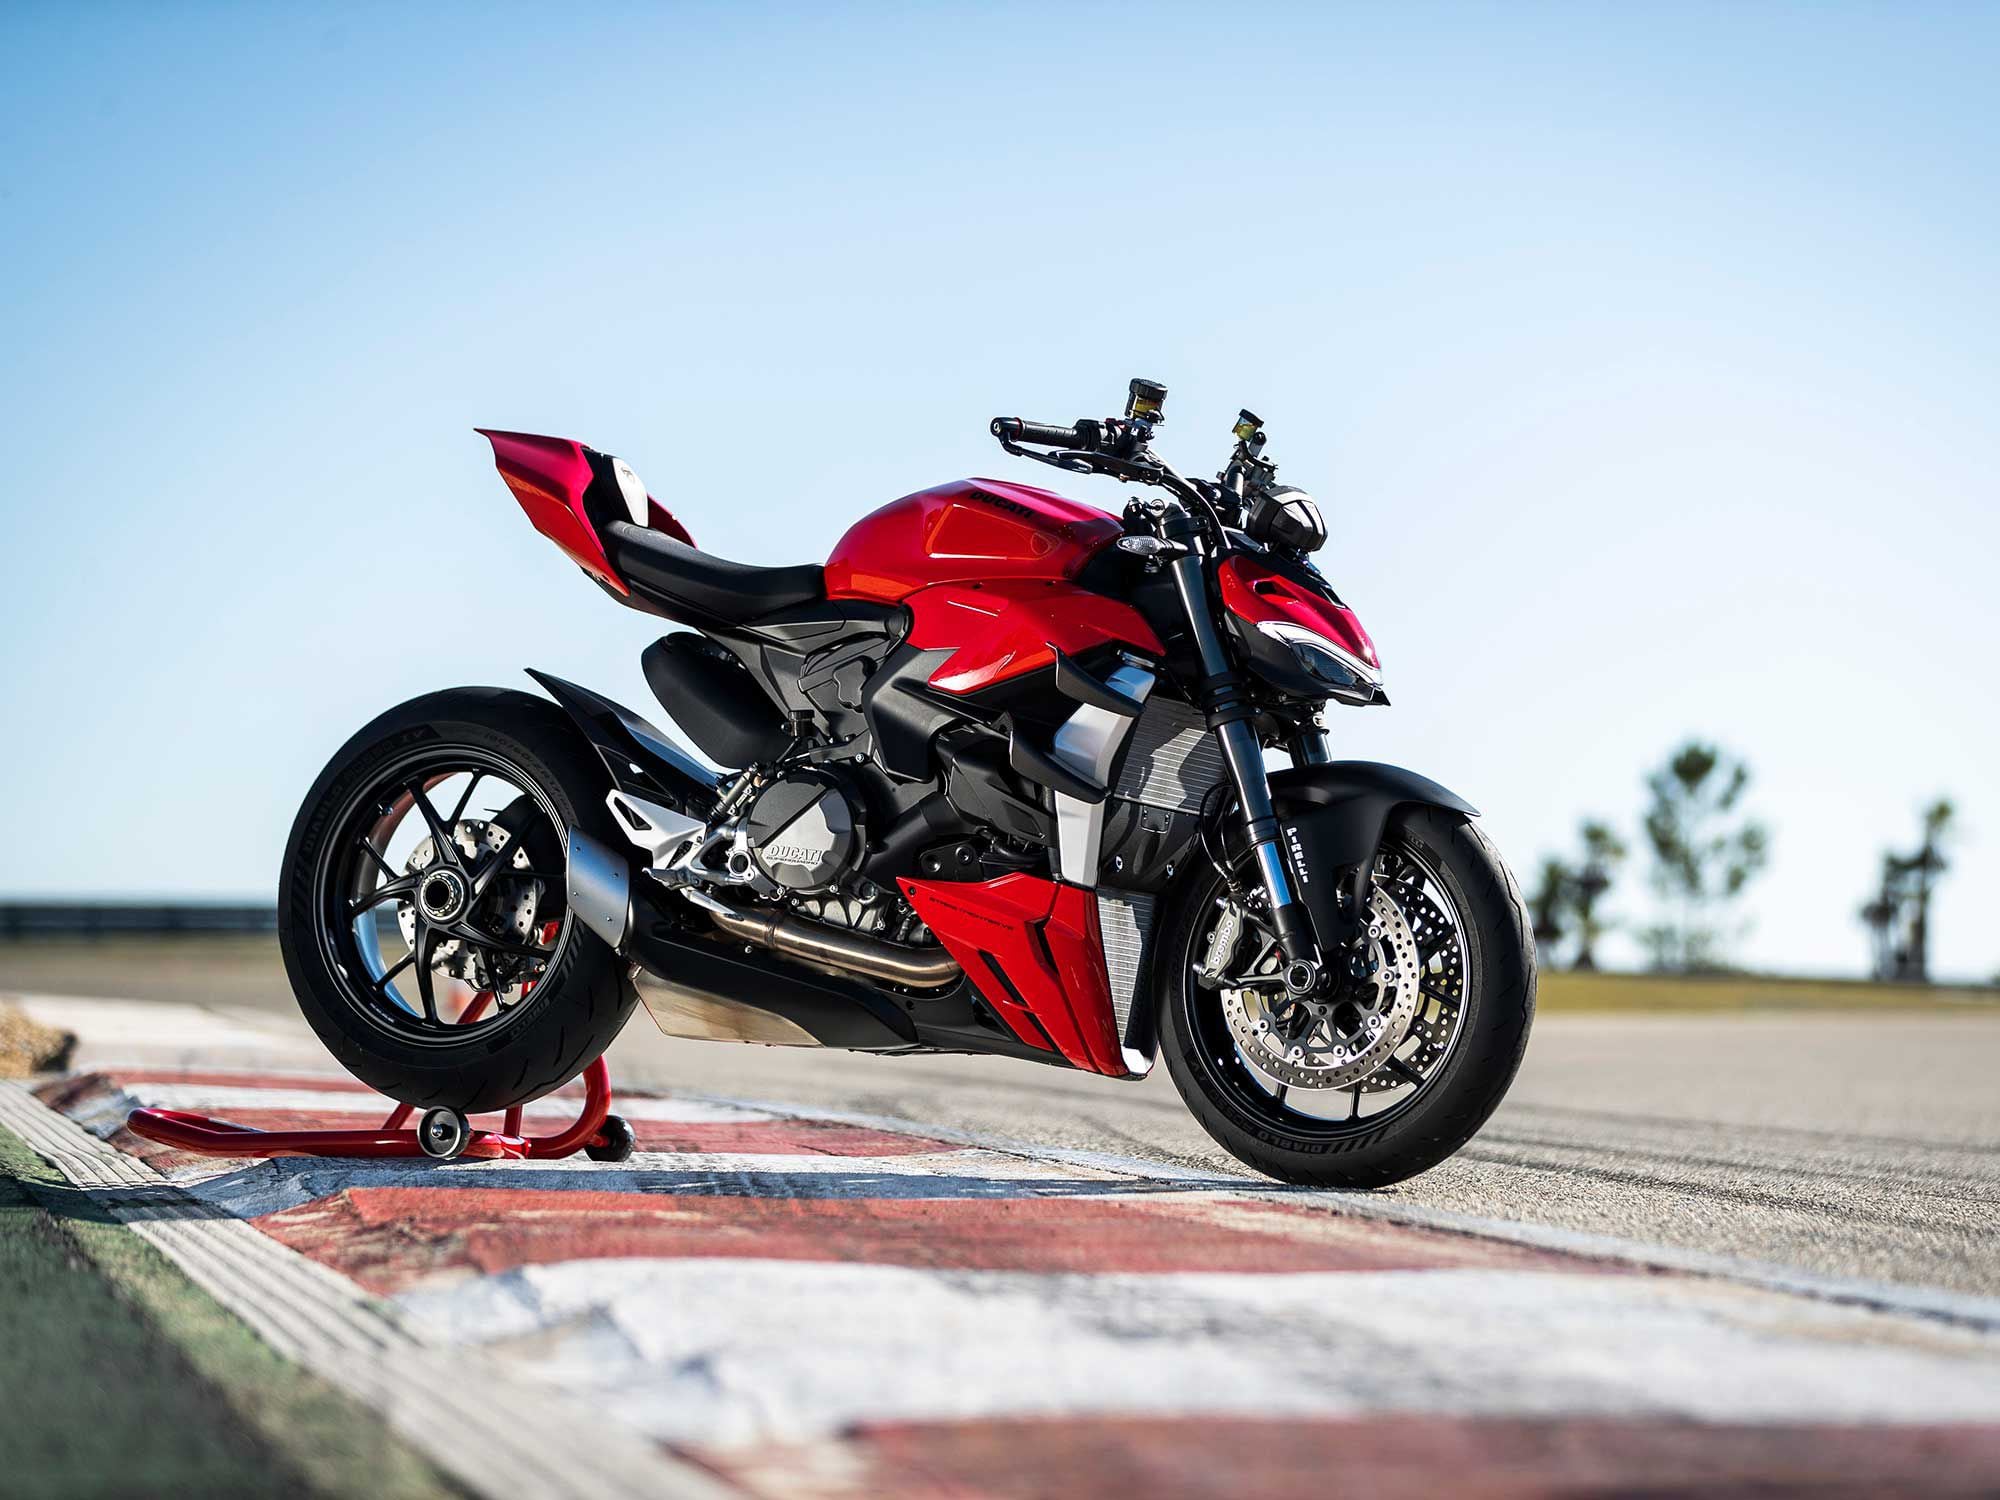 The Streetfighter V2 retails for $16,995, while Ducati offers a number of performance-minded accessories via its parts catalog, including this biplane winglets fitted to our test unit at the racetrack.